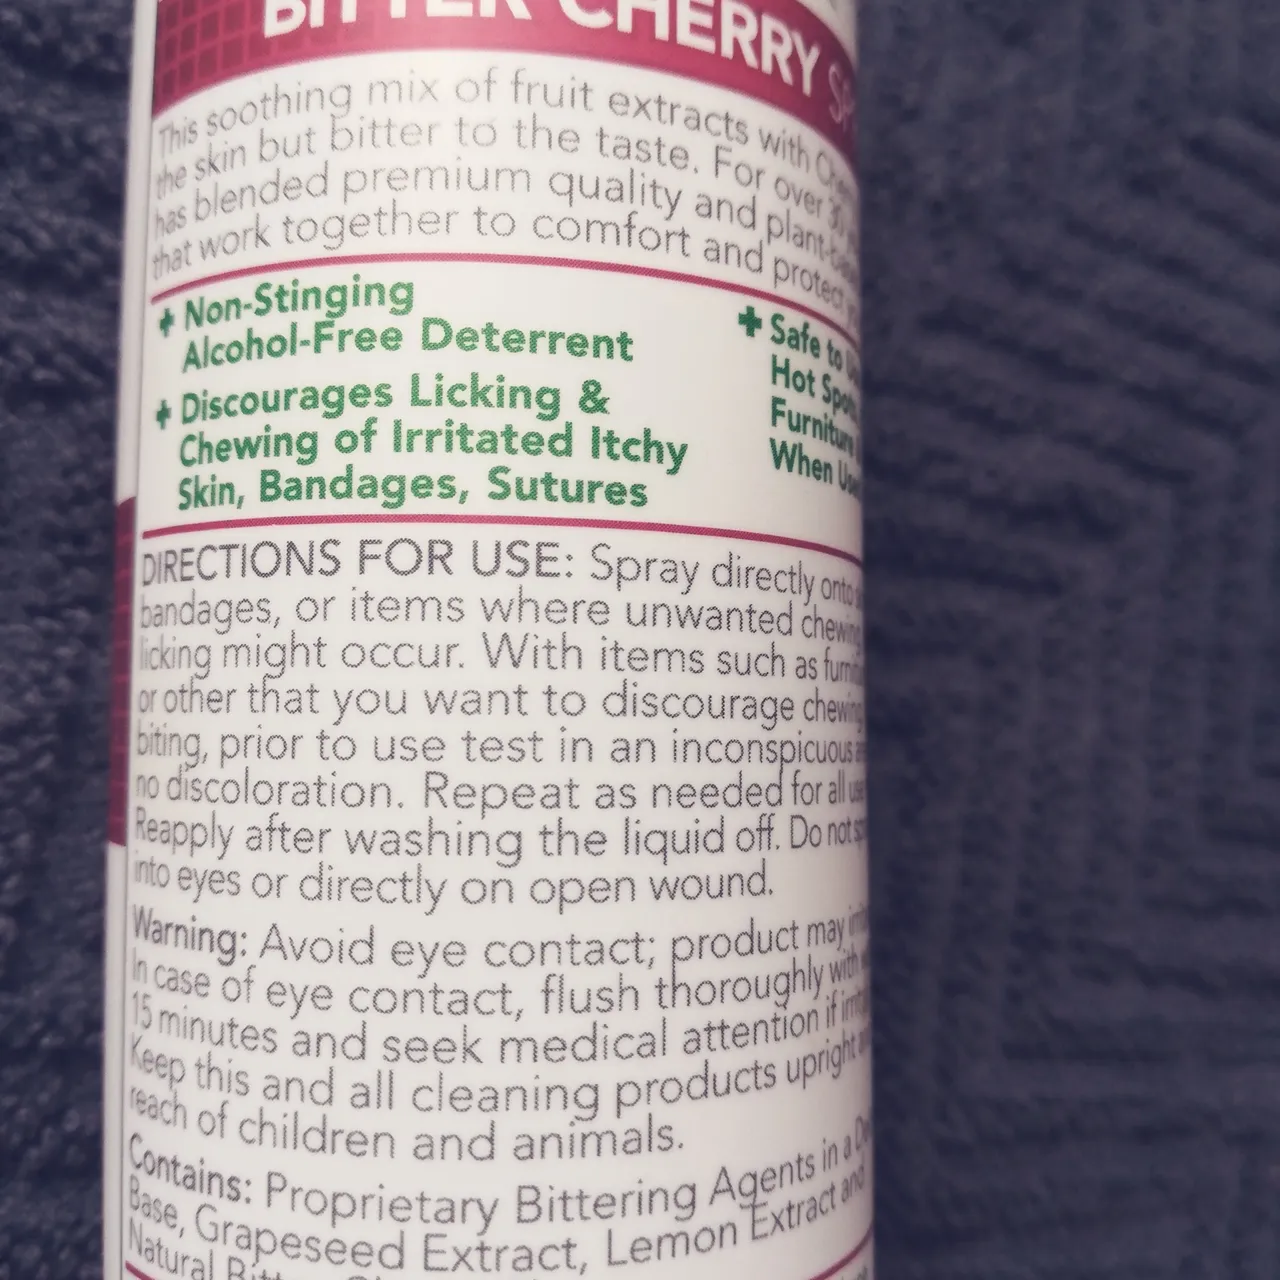 all natural bitter cherry spray for pets photo 3